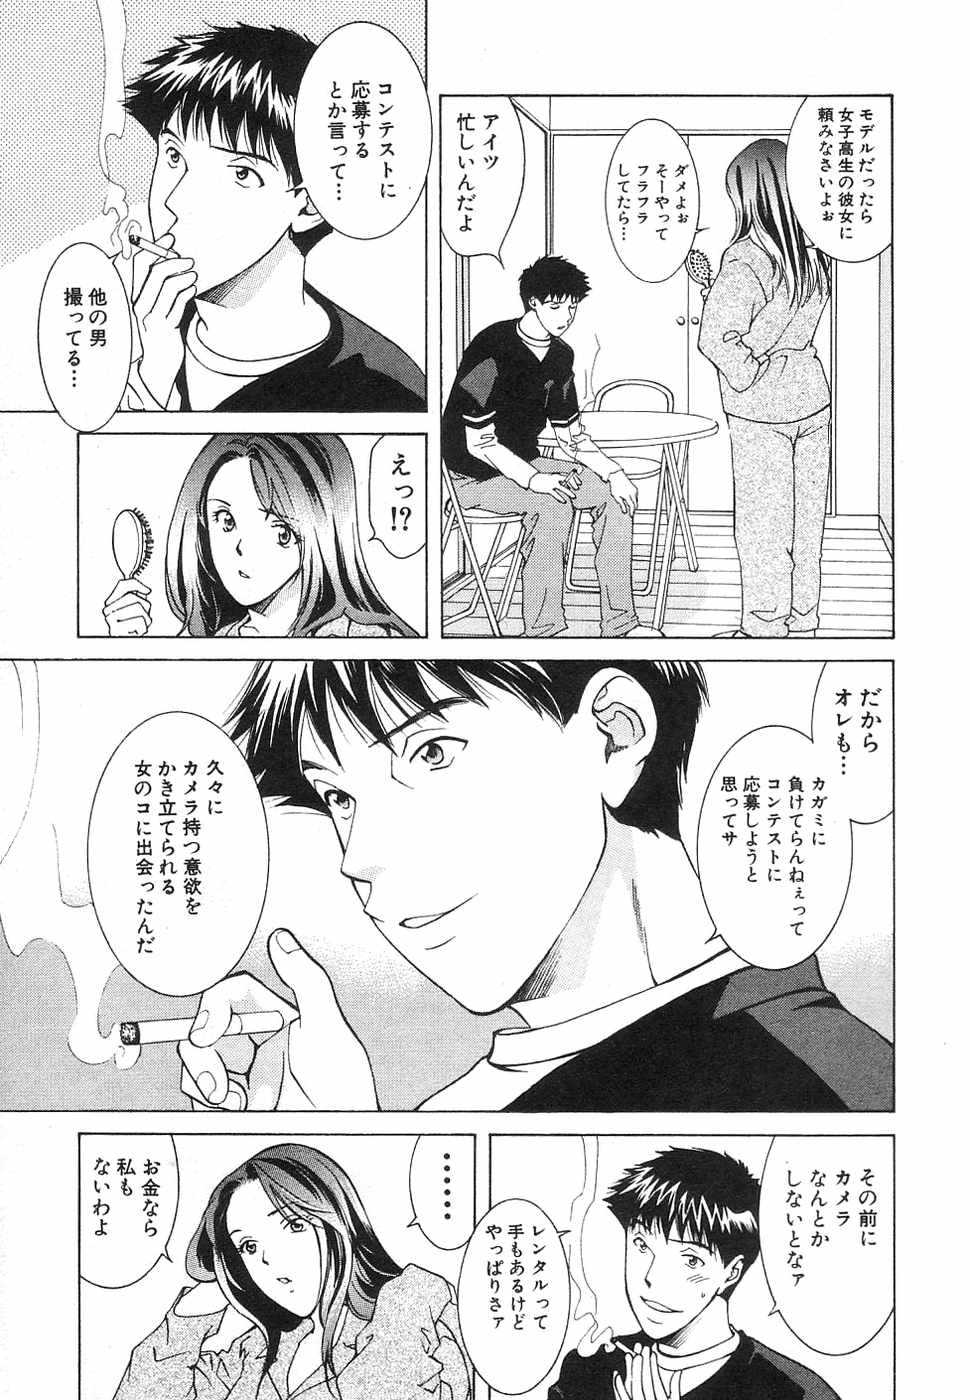 [SENDOU Masumi] Ai: You Don&#039;t Know What Love Is Vol.5 (RAW) [仙道ますみ] あい。:You don&#039;t know what Love is